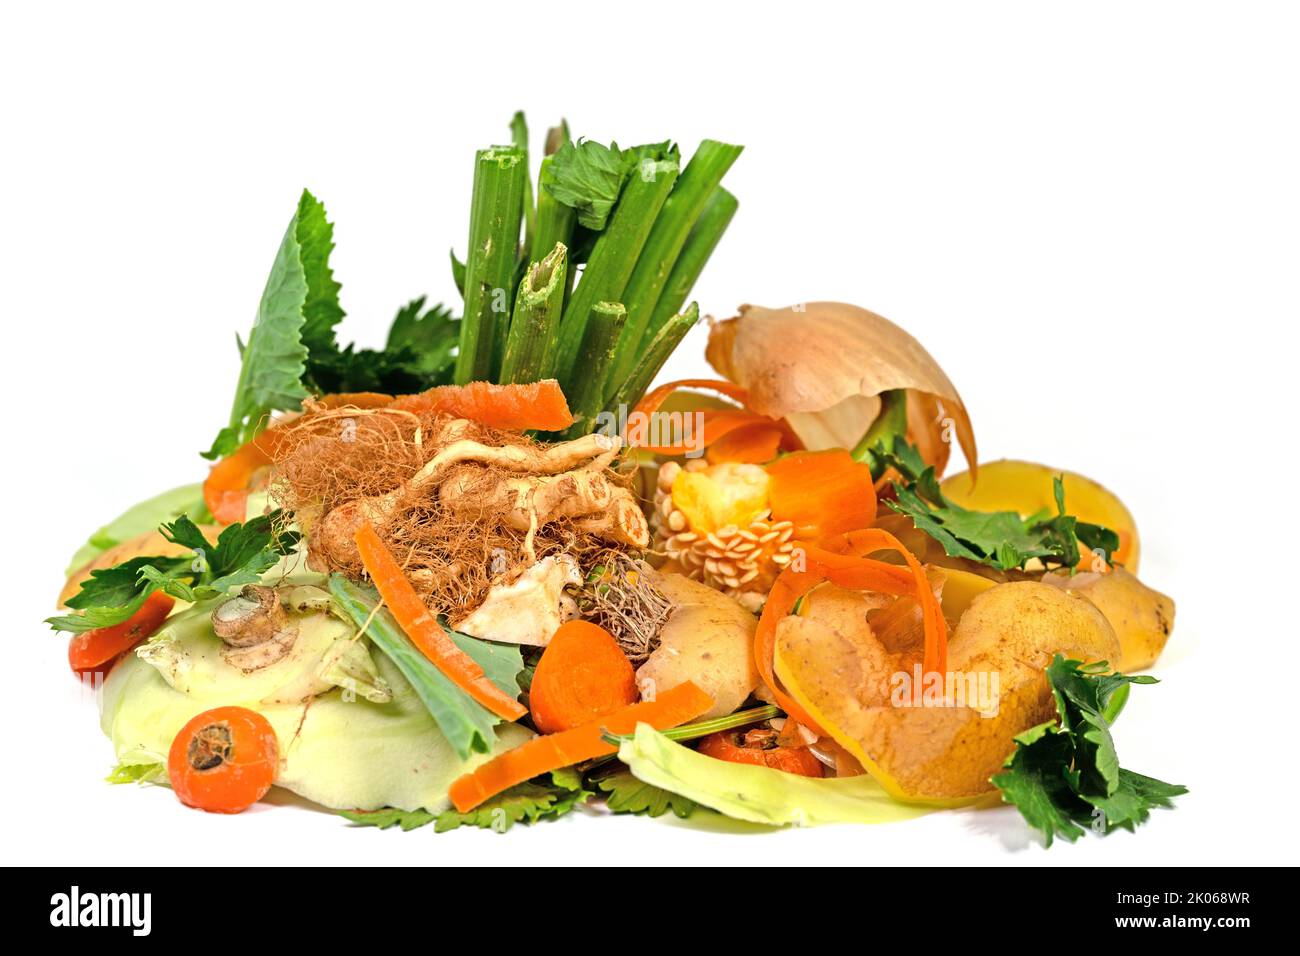 Organic waste for composting against a white background Stock Photo